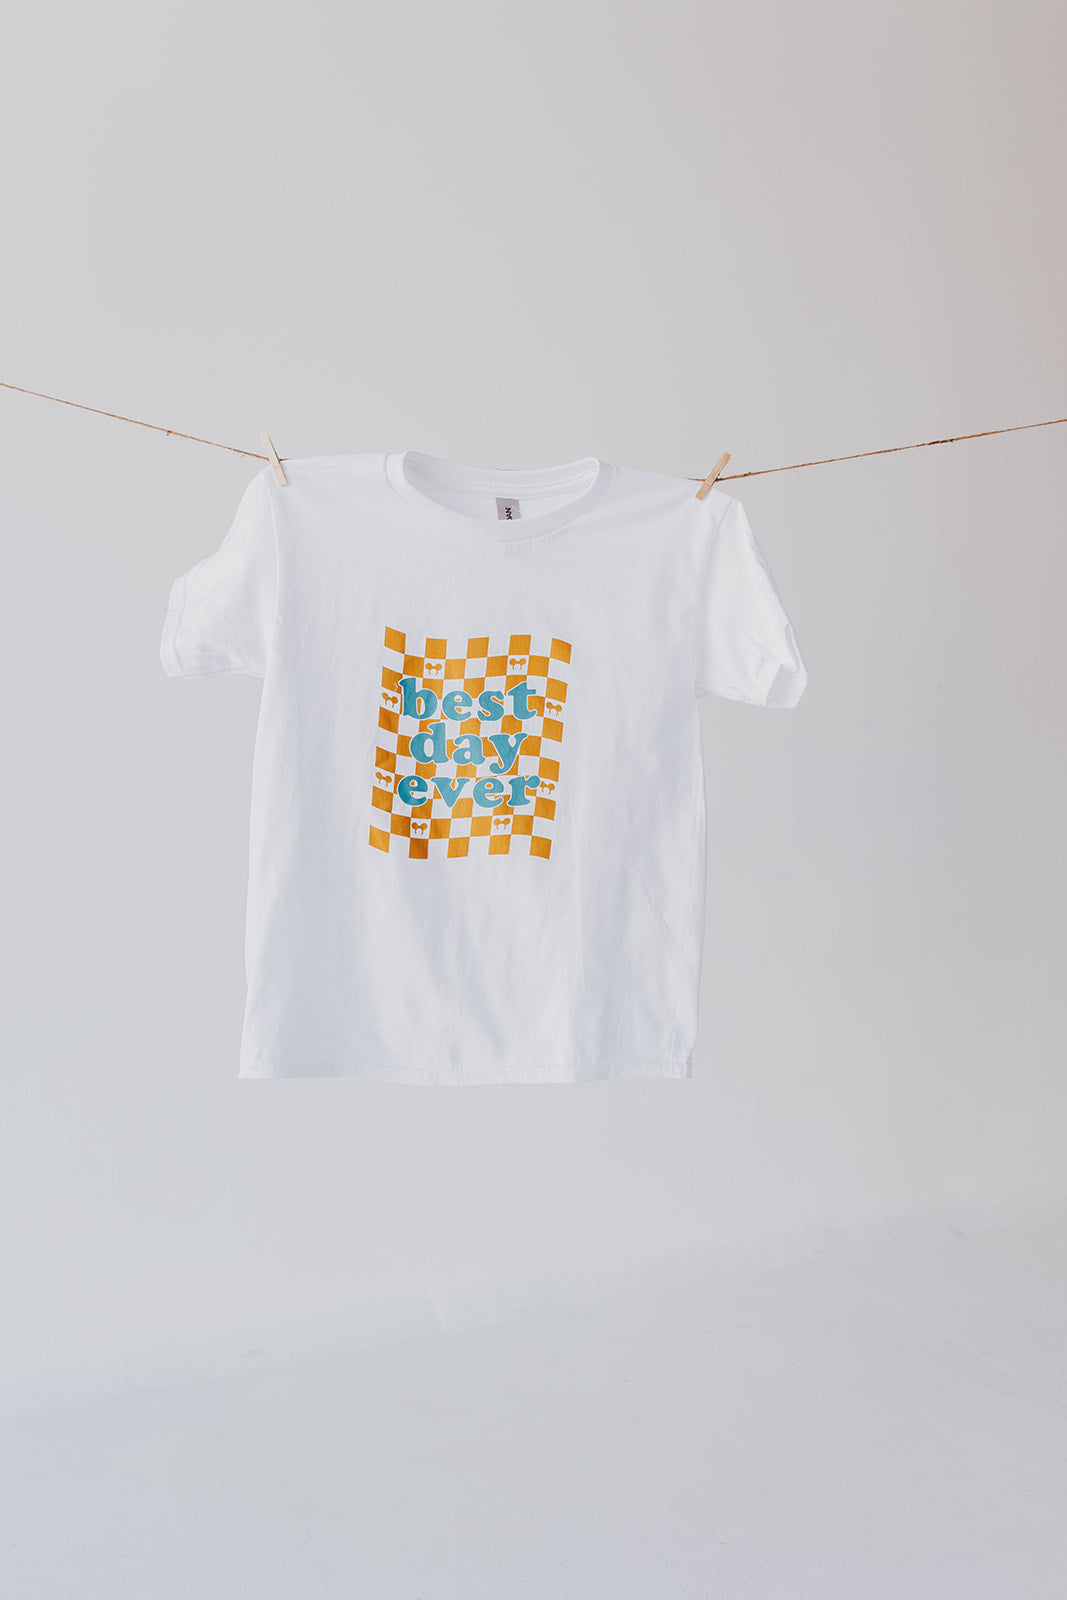 THE BEST DAY EVER KIDS WHITE TEE BY HAPPY THREADS X PINK DESERT IN BLUE AND ORANGE